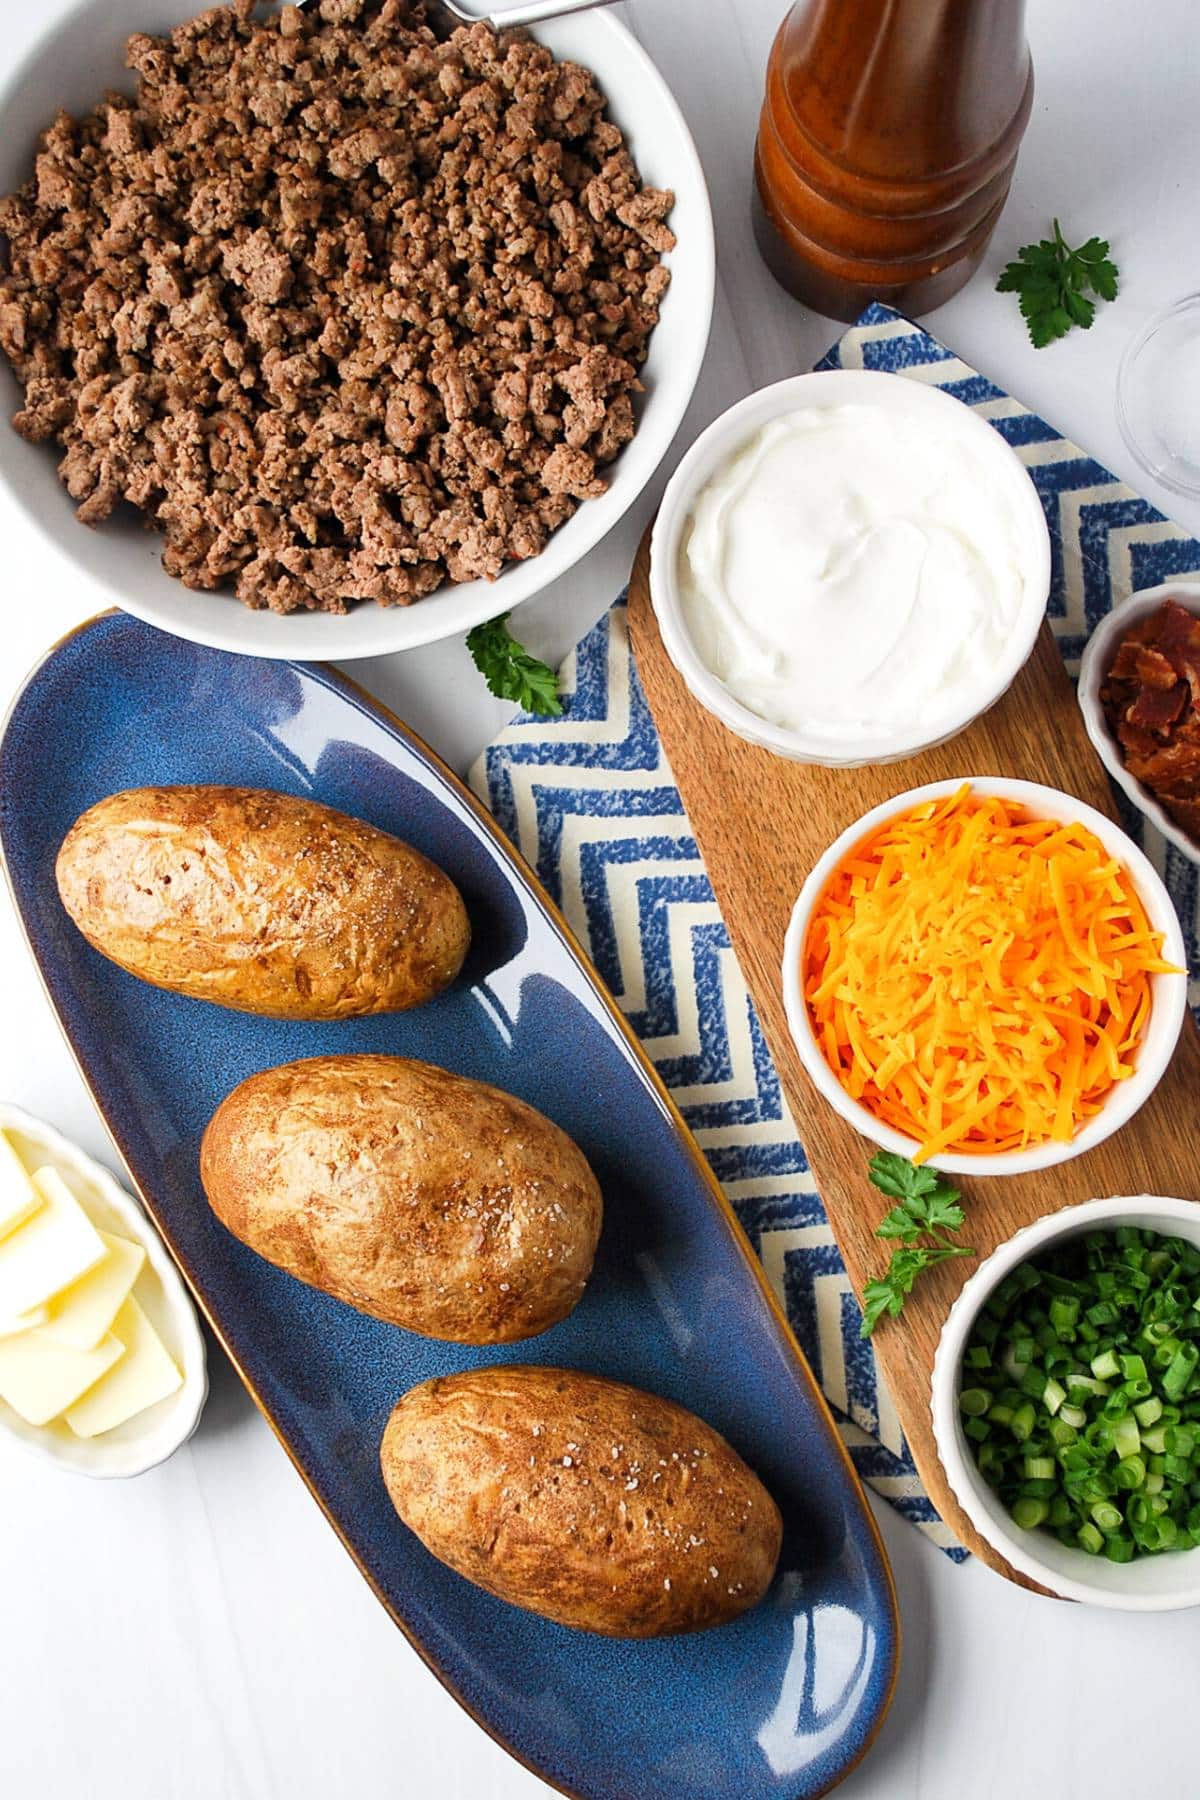 ingredients for a baked potato bar on a table: potatoes, cooked ground beef and sausage, butter, sour cream, cheese, bacon, and green onions